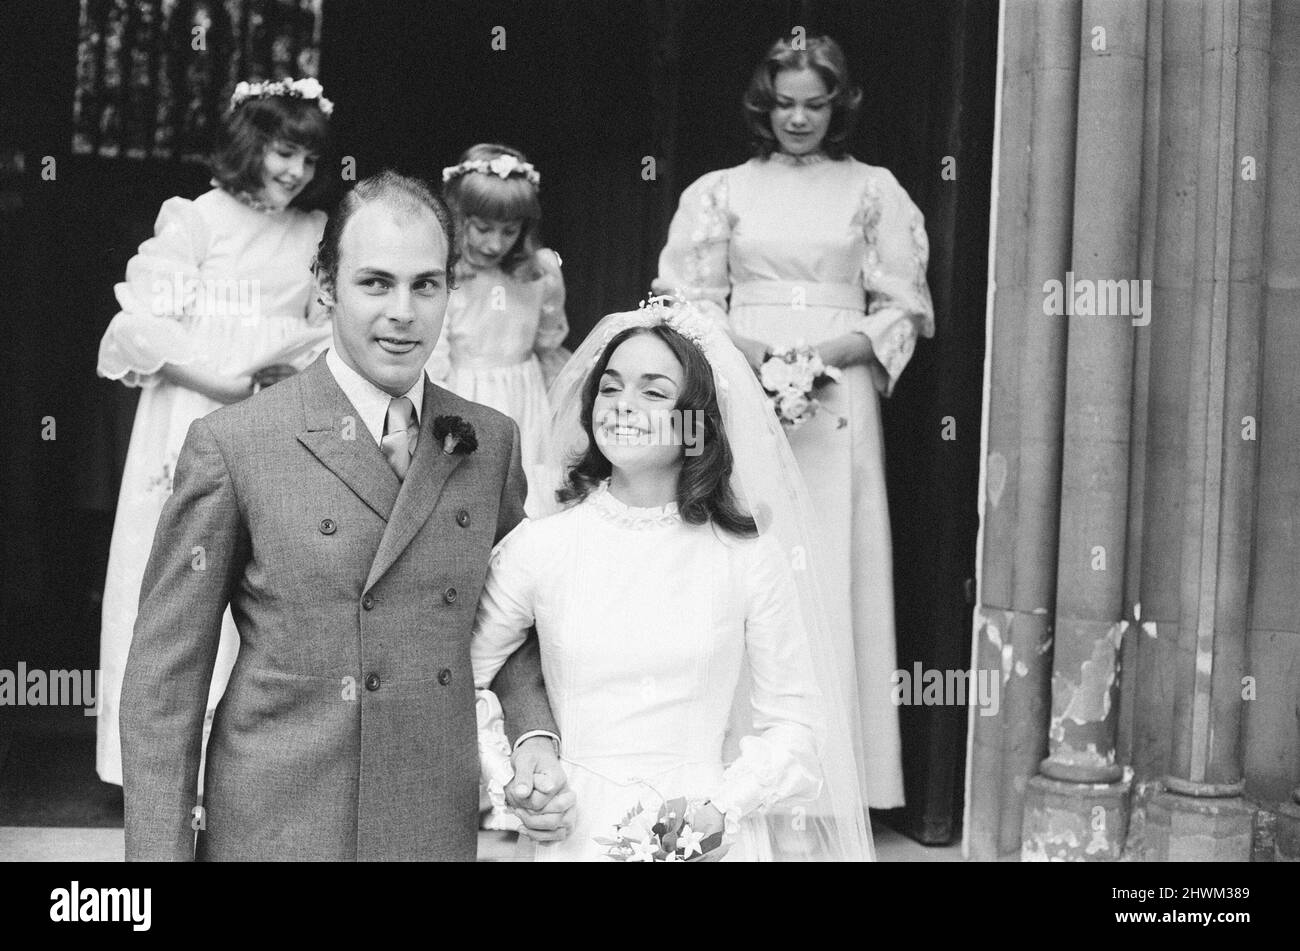 Wedding of Julie Parker and Timothy Buxton, at the Church of the Immaculate Conception, Farm Street, London, 14th June 1972. Our Picture Shows ... bride and groom.  Julie Parker 22 is the daughter of Commander Michael Parker, a friend and former Private Secretary to Prince Philip, The Duke of Edinburgh, who is the god father of Julie Parker.   Timothy Buxton is the son of naturalist and television executive Aubrey Buxton, Baron Buxton of Alsa, and an old friend of Prince Philip. Stock Photo